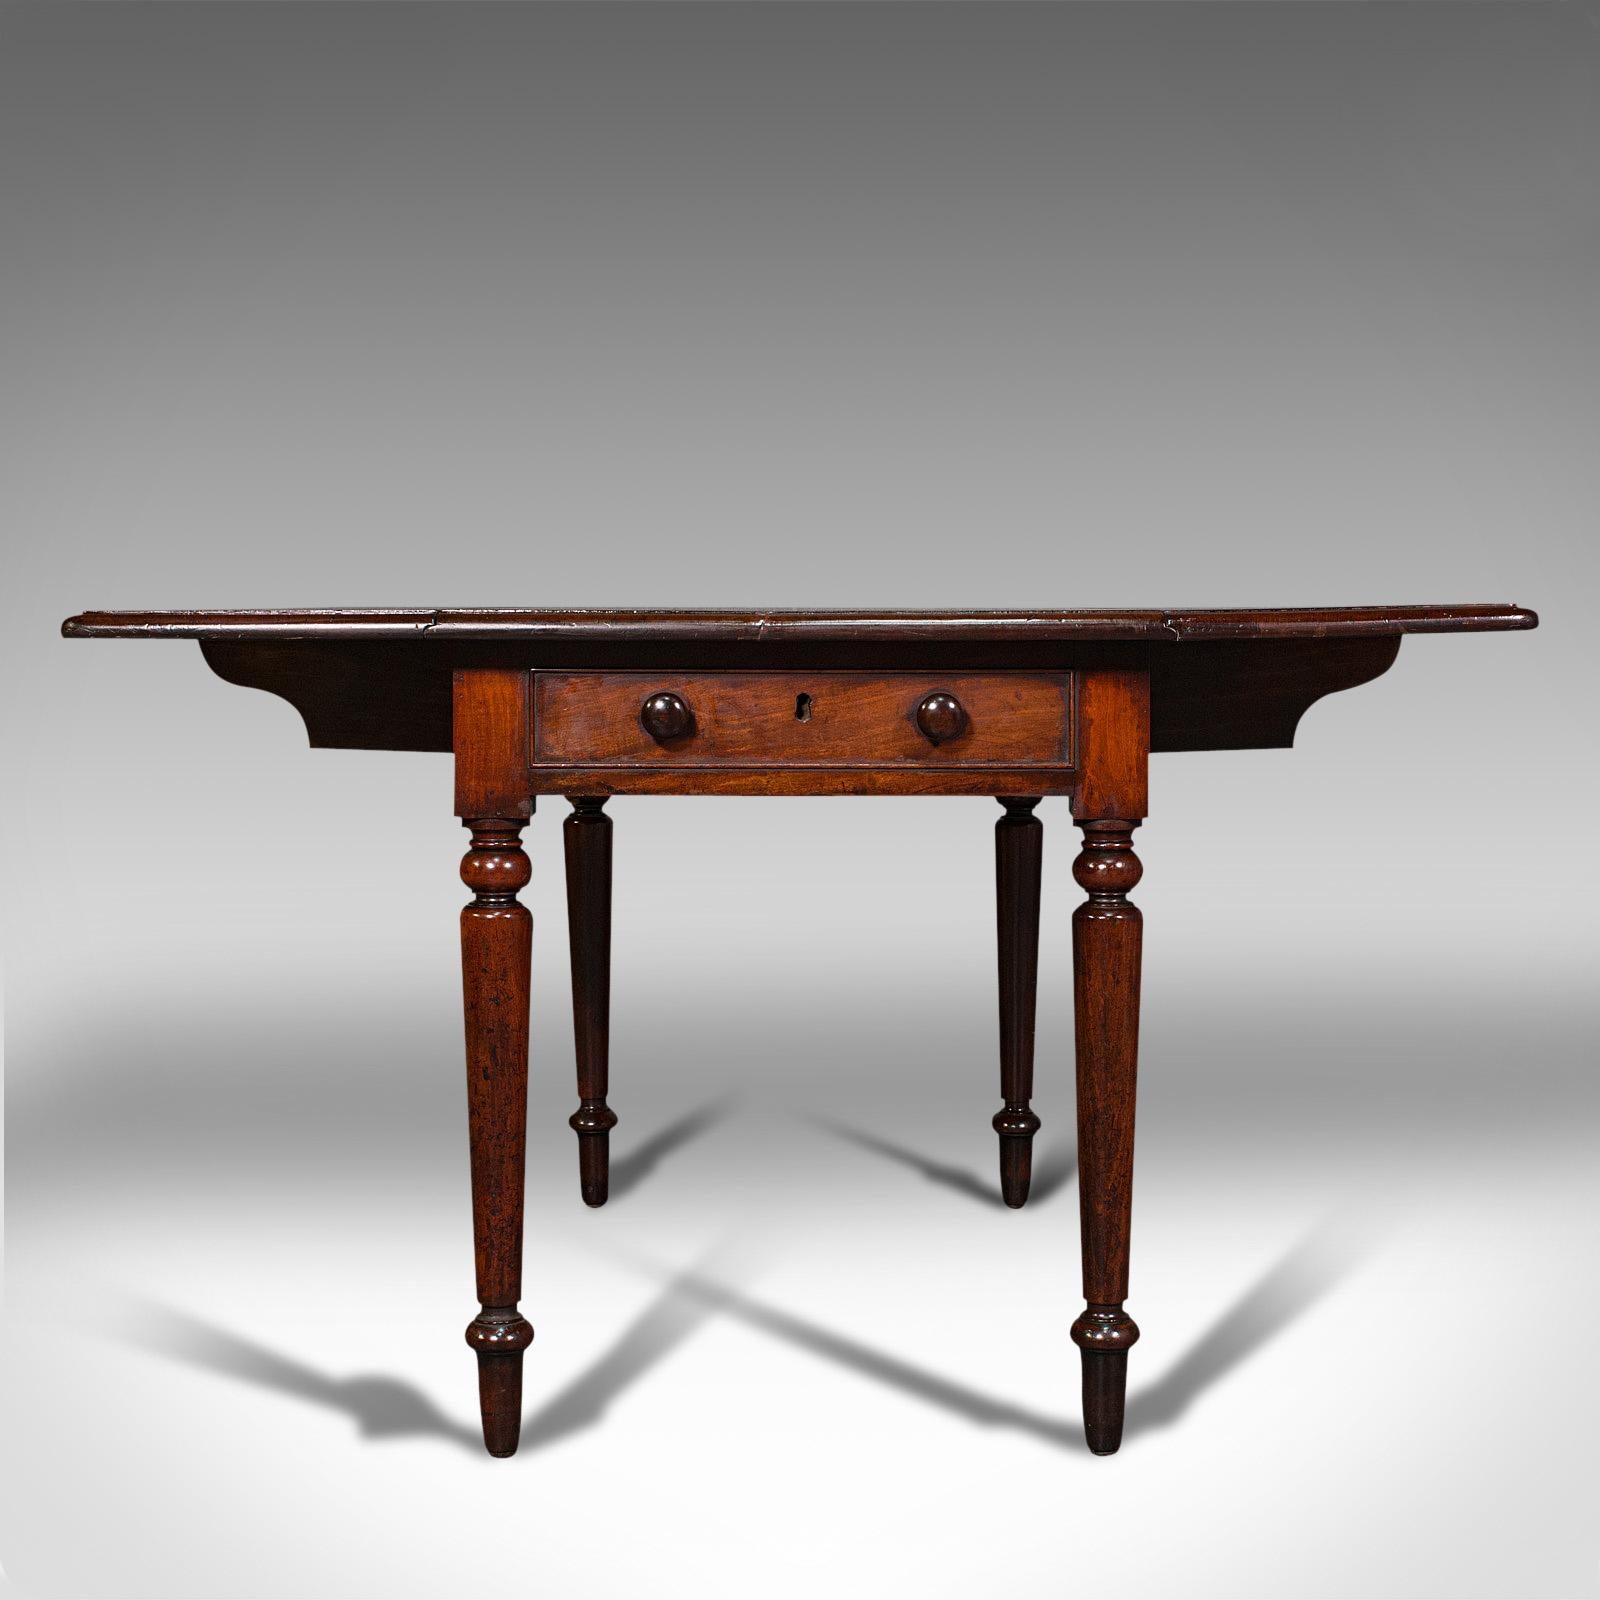 19th Century Antique Pembroke Table, English, Mahogany, Extending, Dining, Regency, C.1820 For Sale